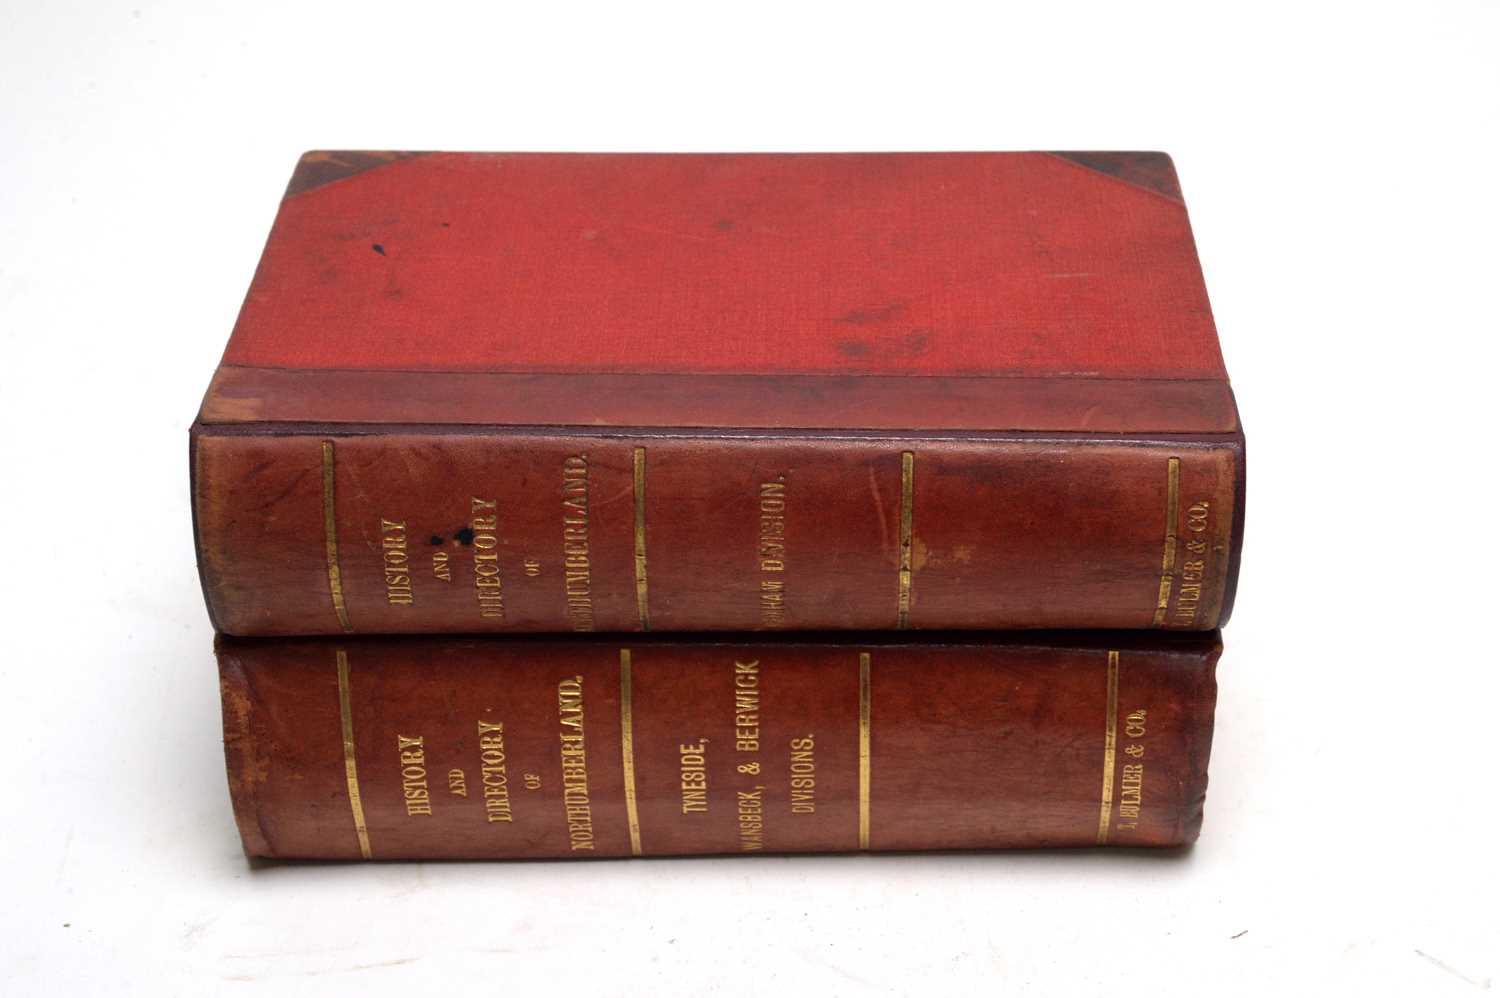 Lot 772 - Bulmer (T.F.), History, Topography and Directory of Northumberland, Hexham etc.